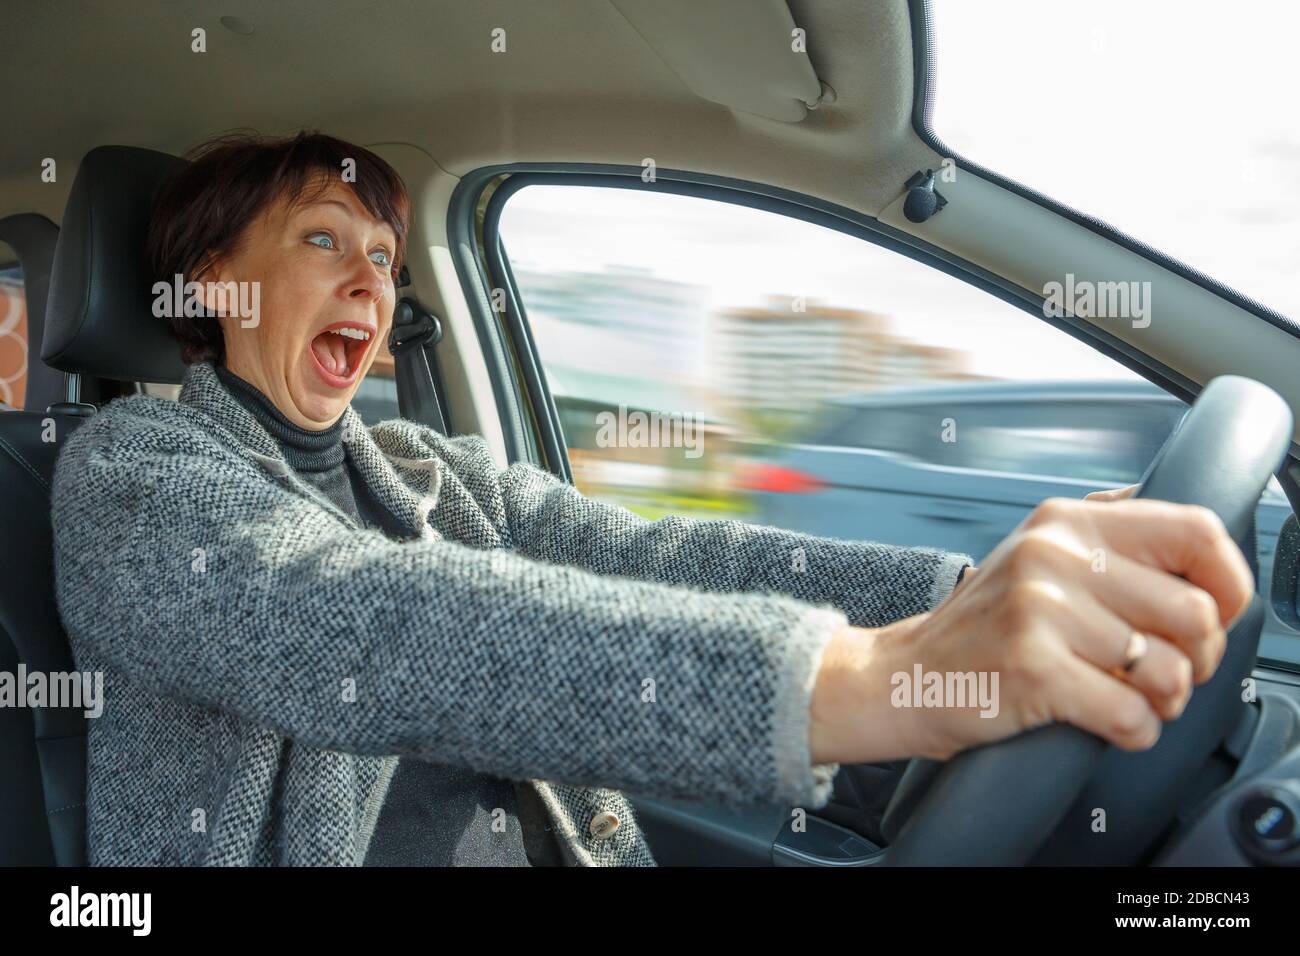 Portrait of a woman driving a car. Stress when learning to drive Stock Photo